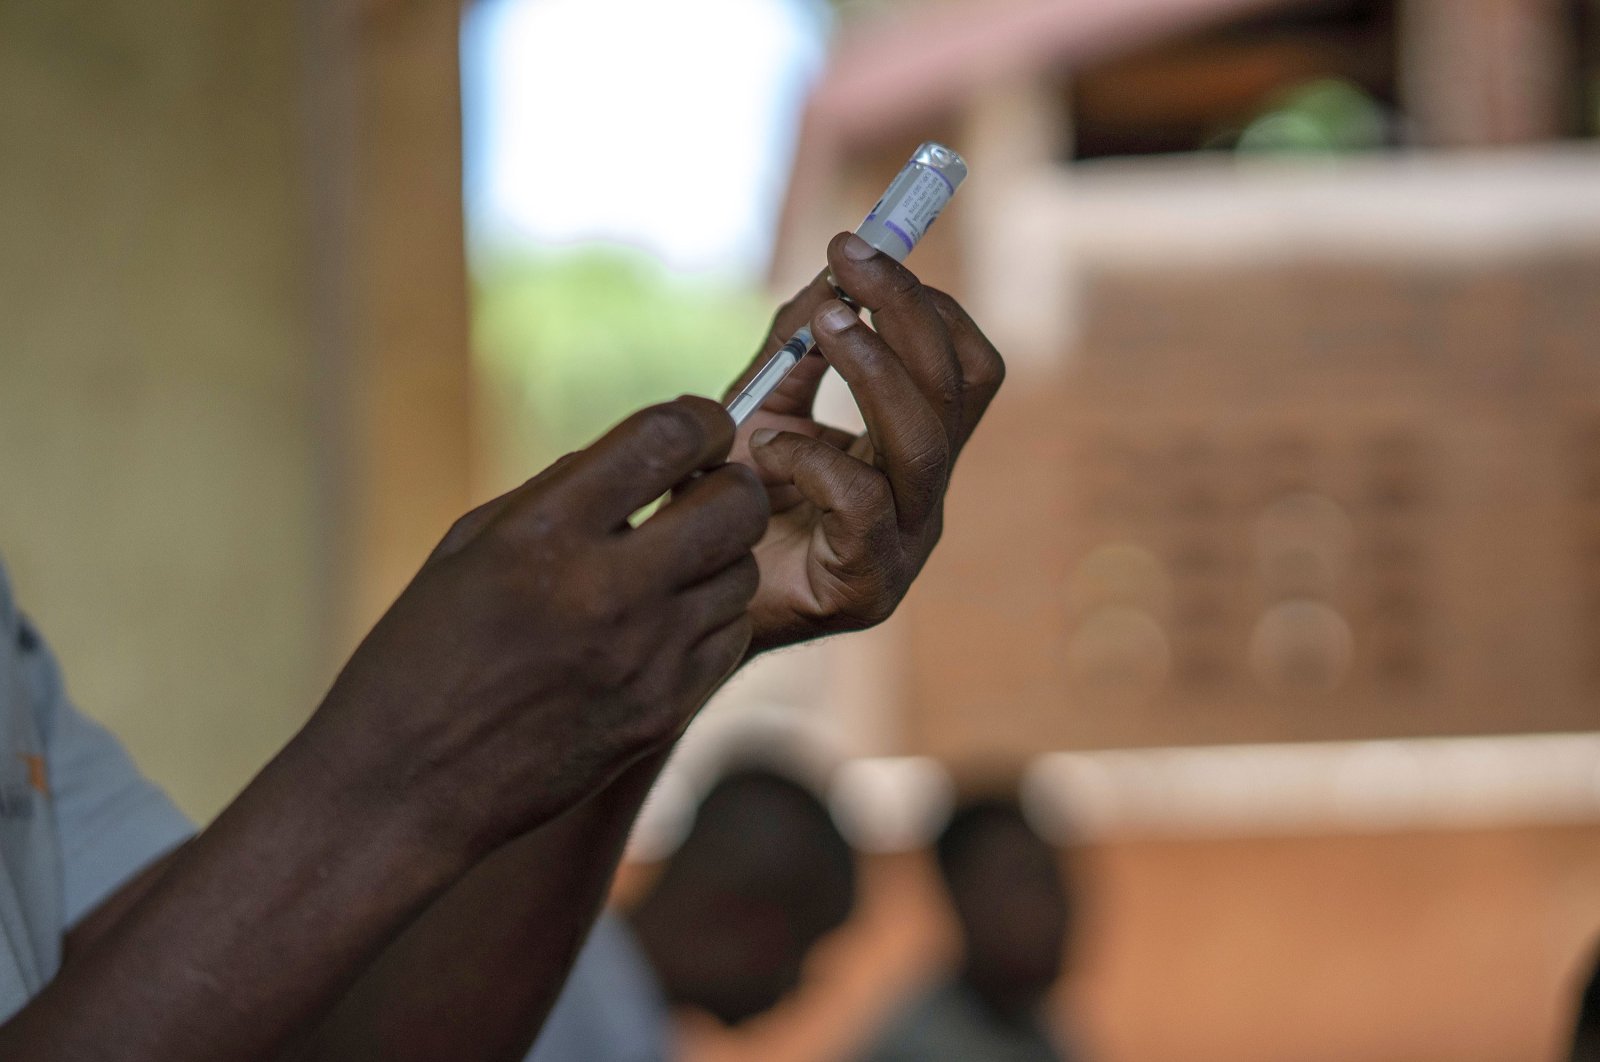 Malaria jab is given to over 650,000 Africans